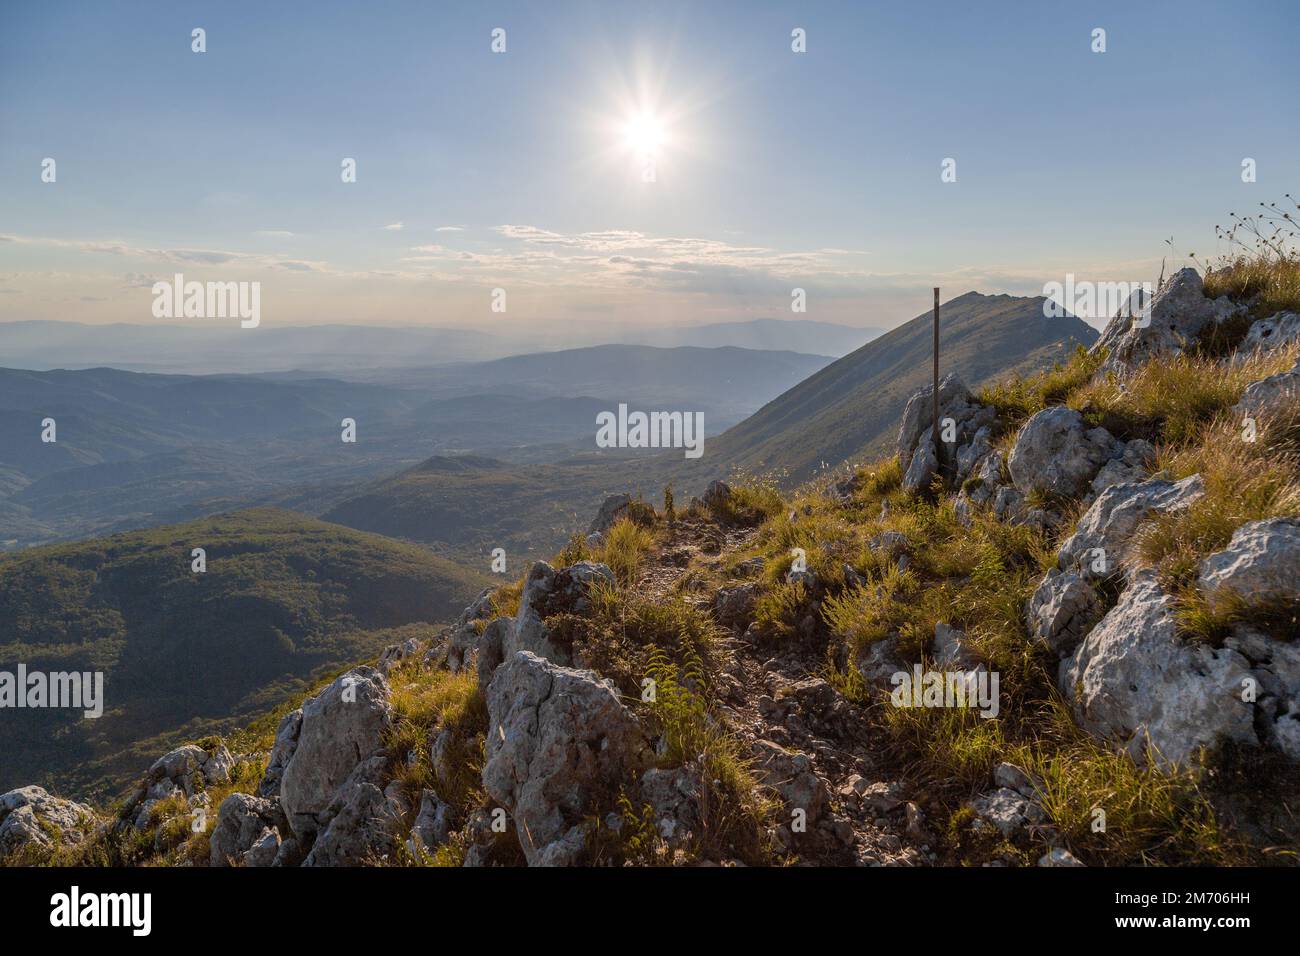 Slopes around the mountain with low grass and karst rocks at sunset Stock Photo